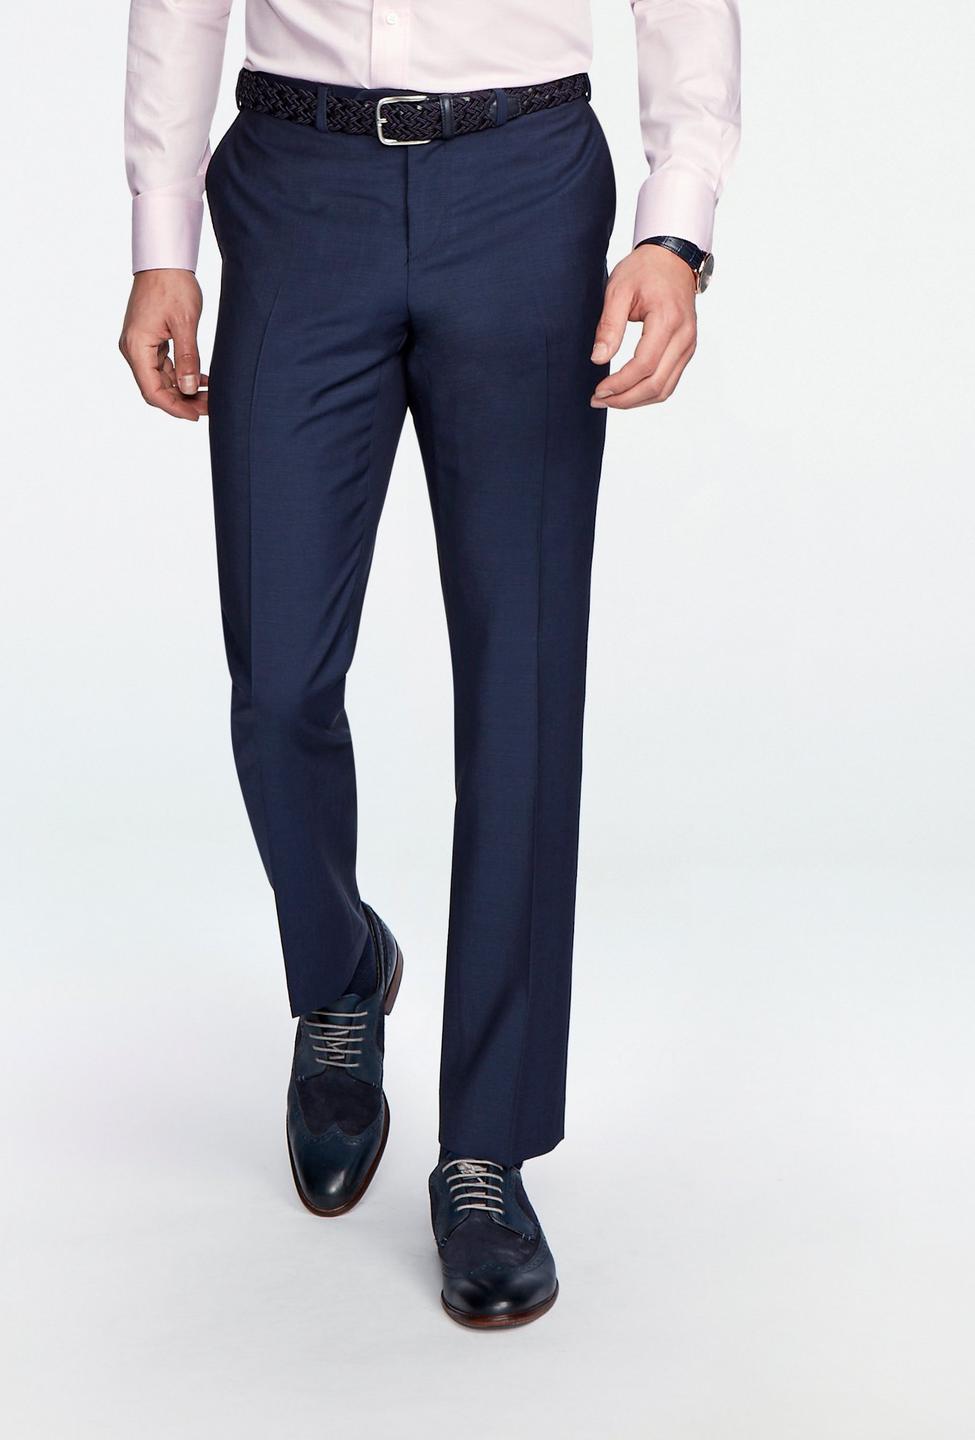 Blue pants - Hamilton Solid Design from Luxury Indochino Collection